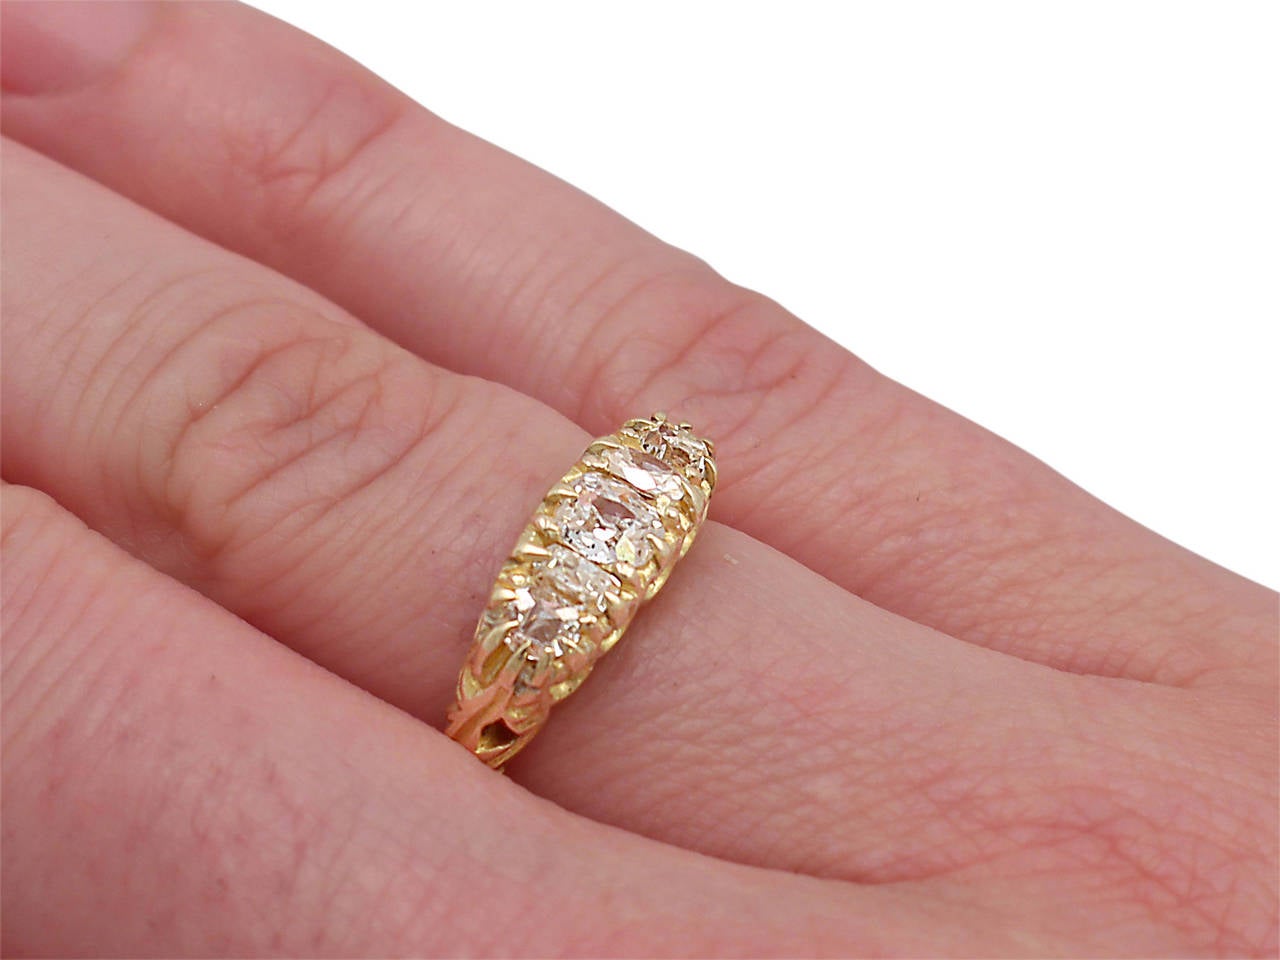 1890s Antique 1.28 Carat Diamond and Yellow Gold Five Stone Ring 2